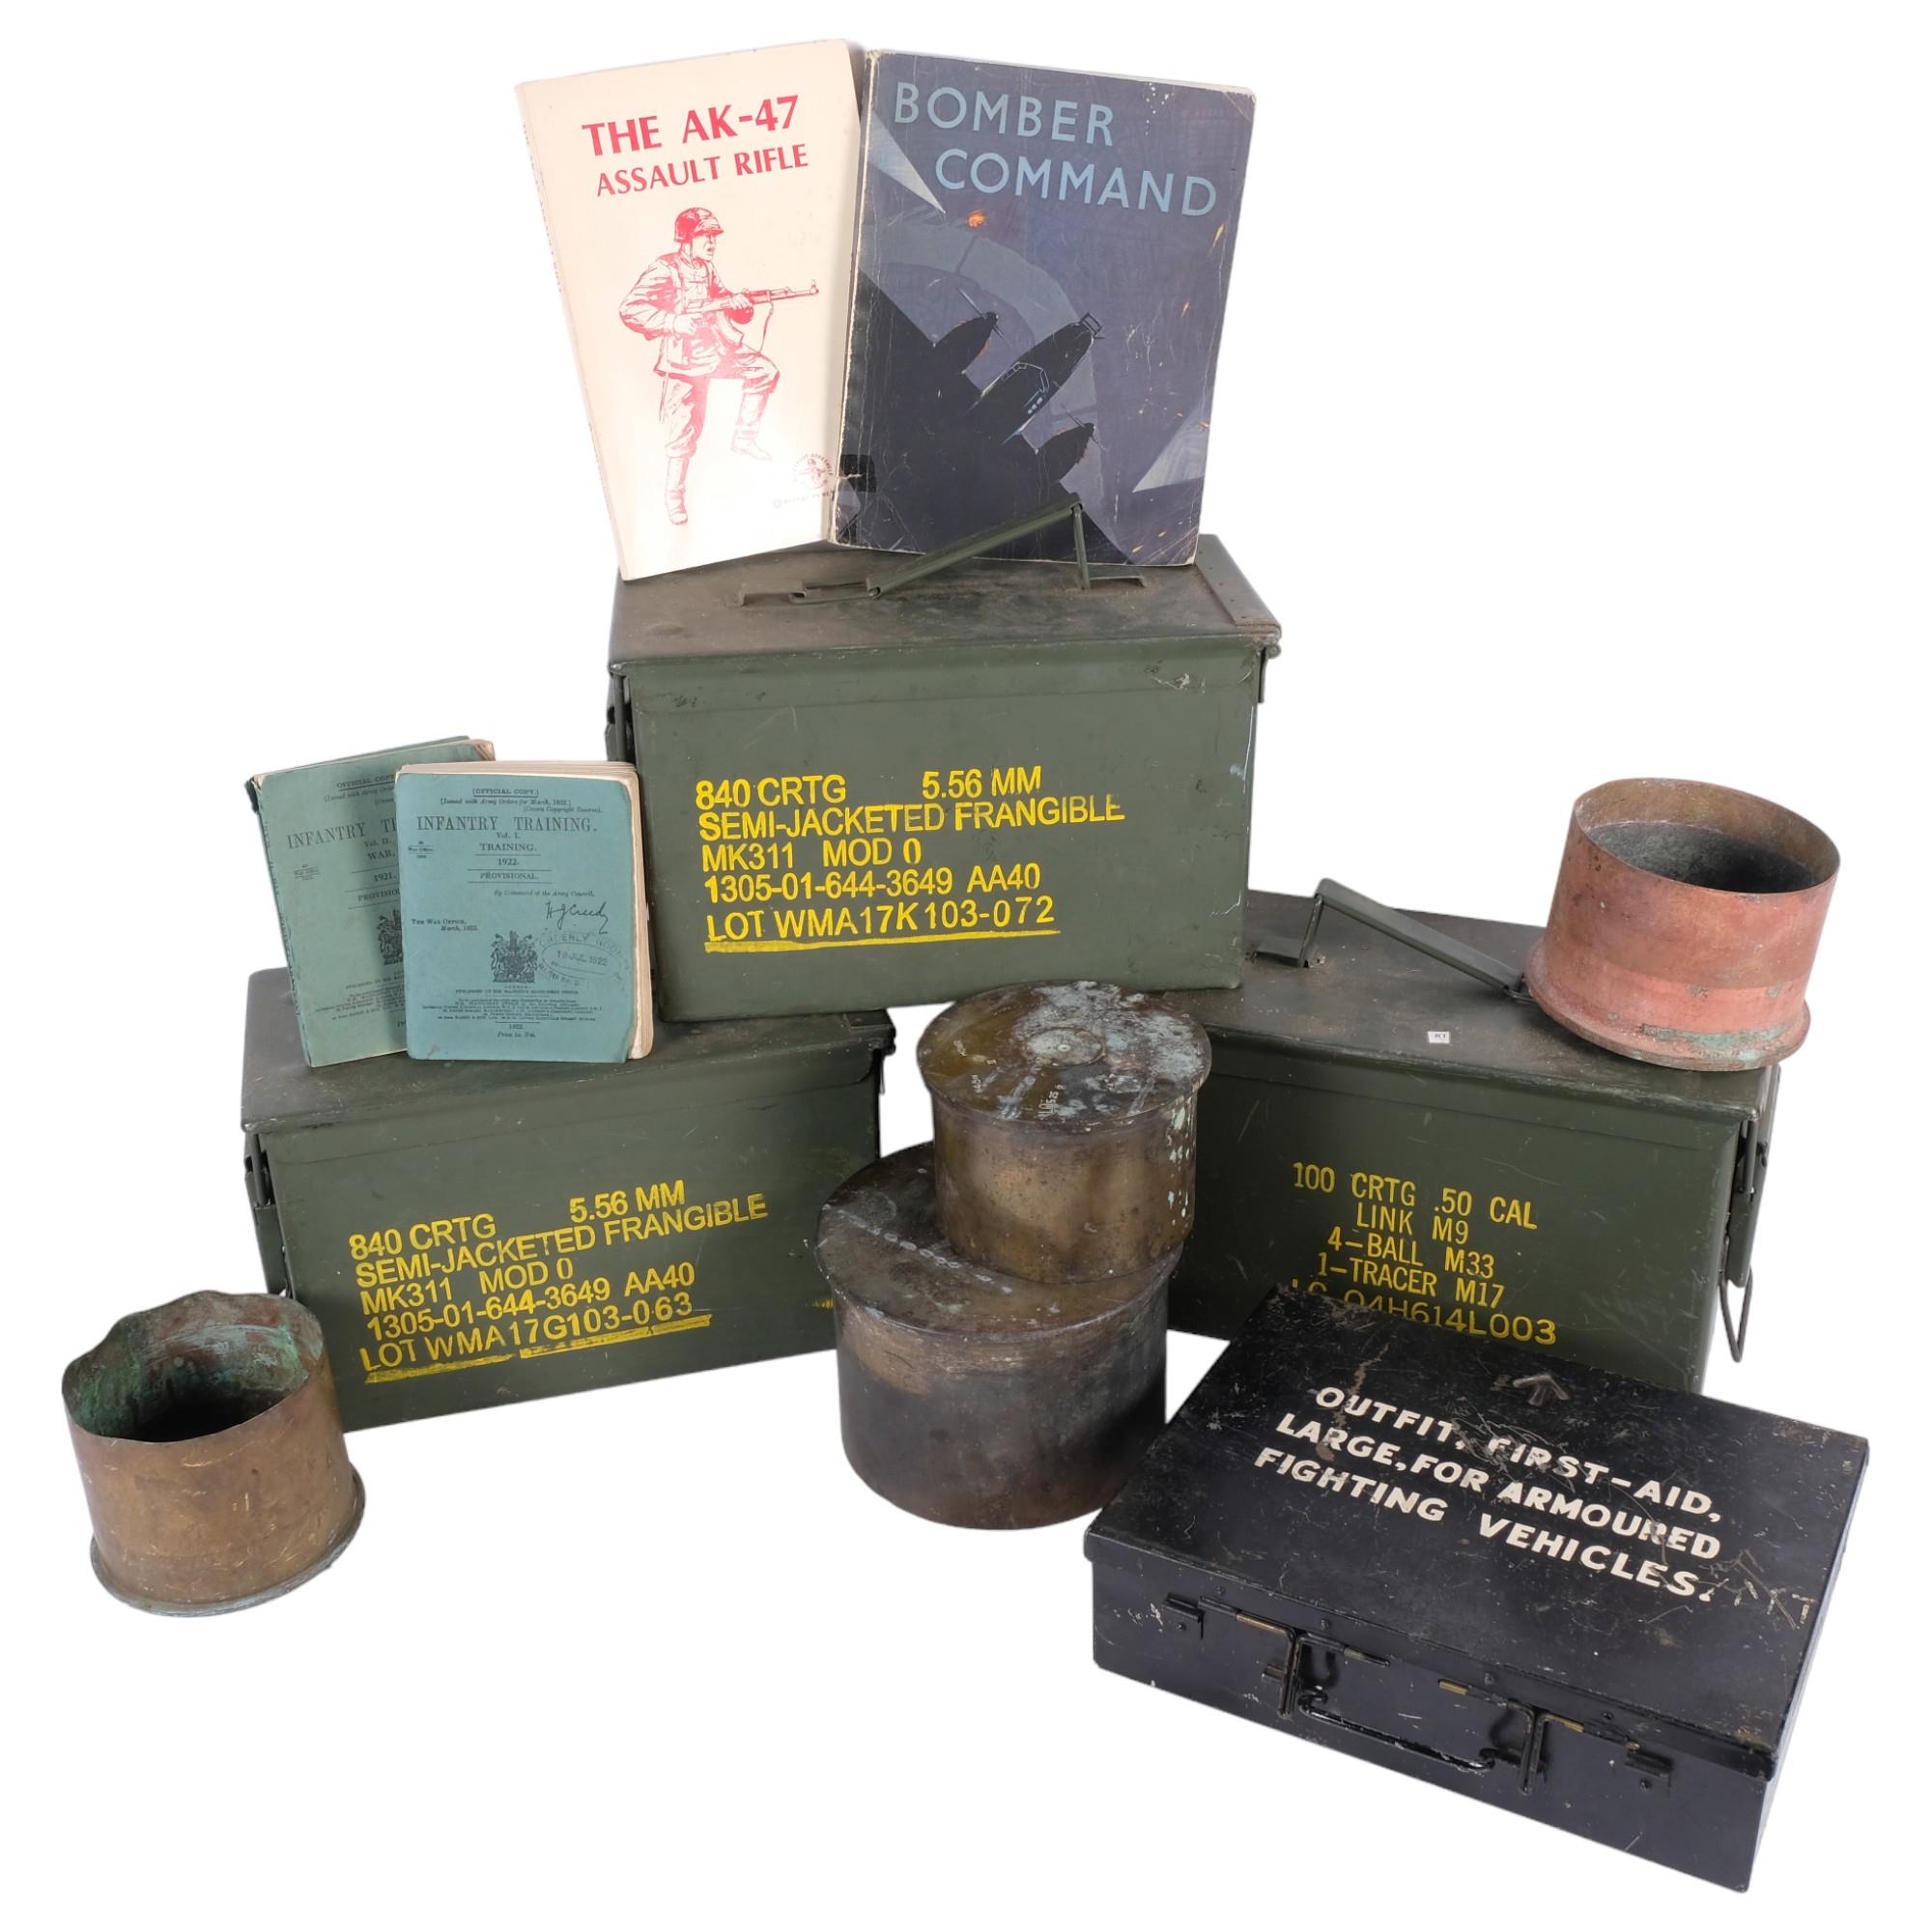 3 ammo boxes, 3 British 4.5 inch mortar shell cases from 1915 and 1918 and one German mortar shell